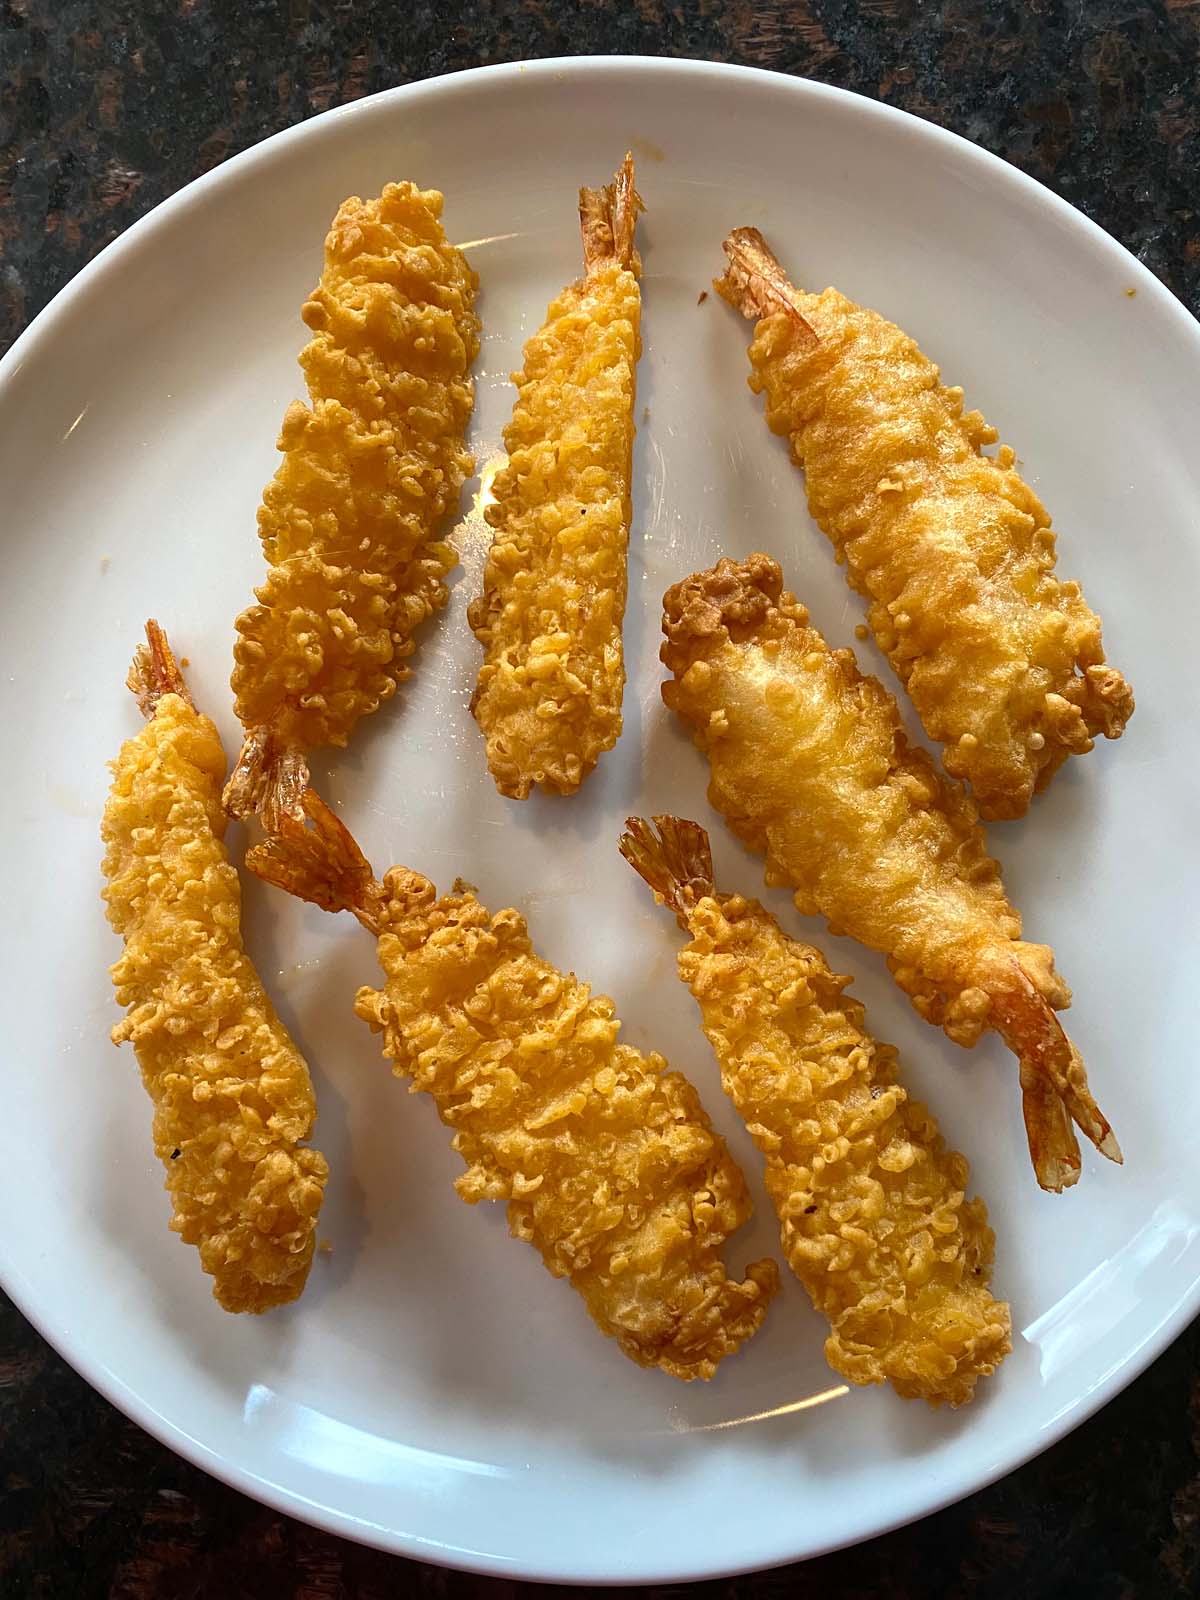 White plate with 8 pieces of cooked crispy shrimp.